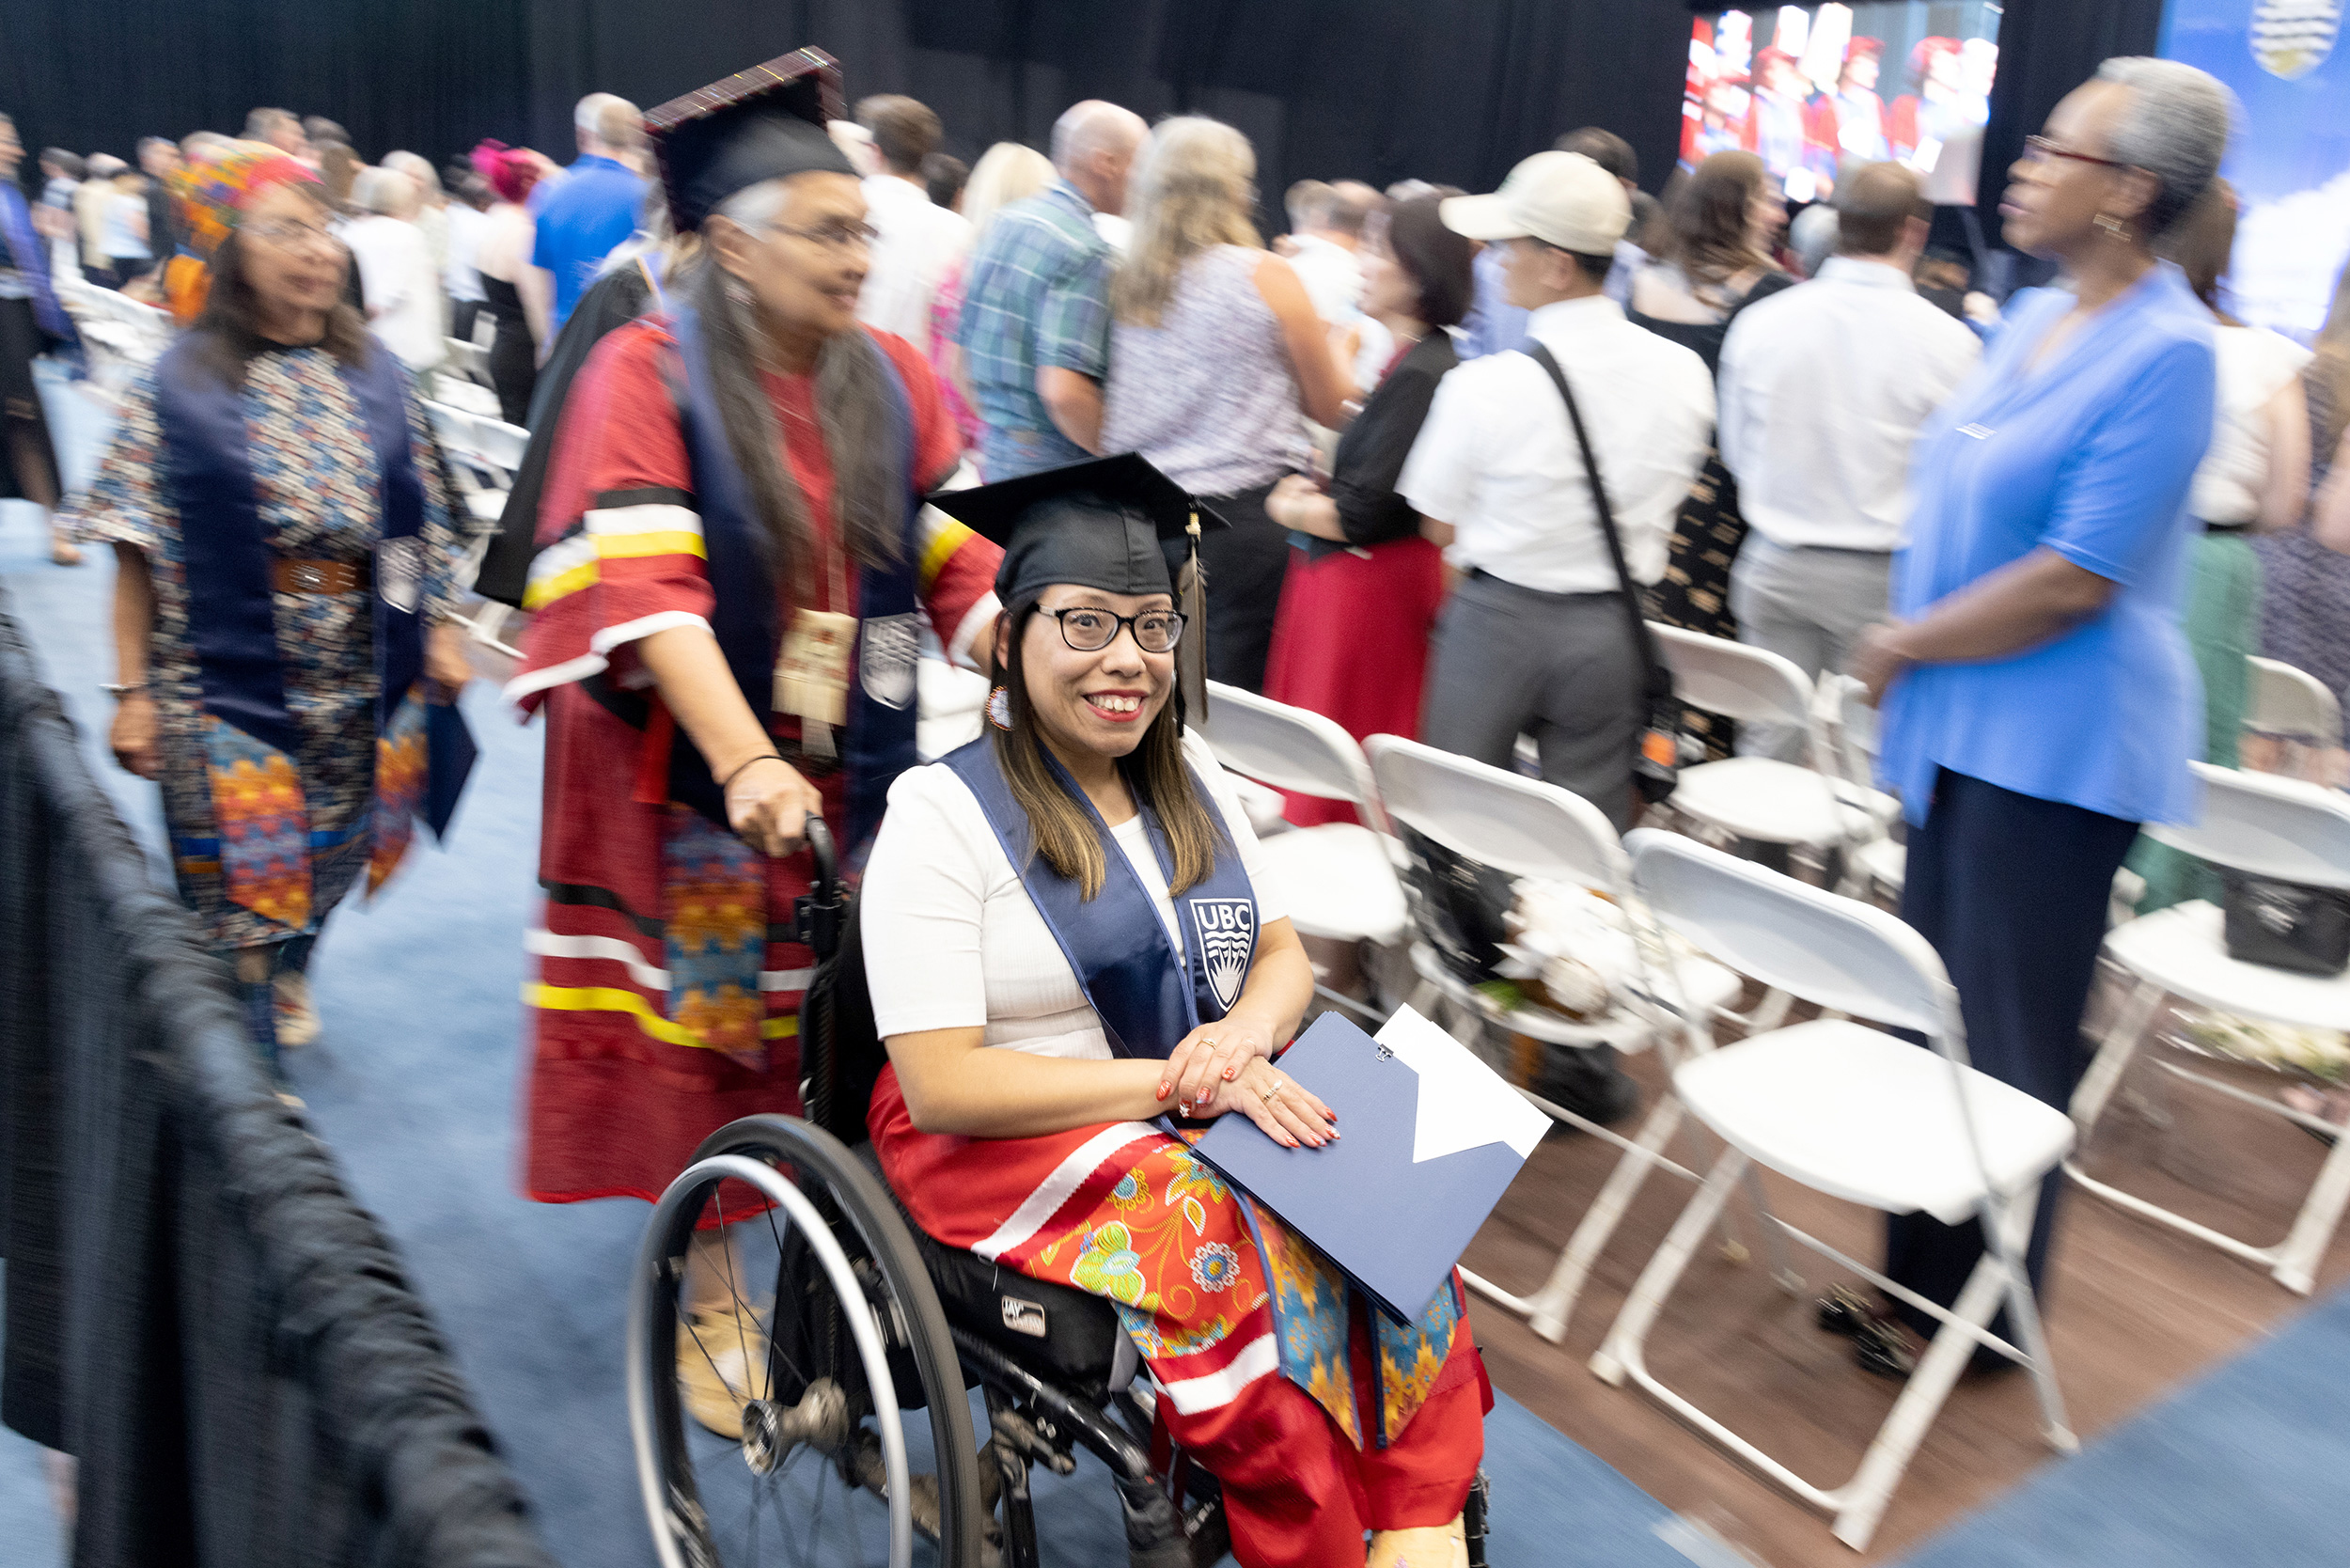 Woman on wheelchair moves through audience at graduation ceremony